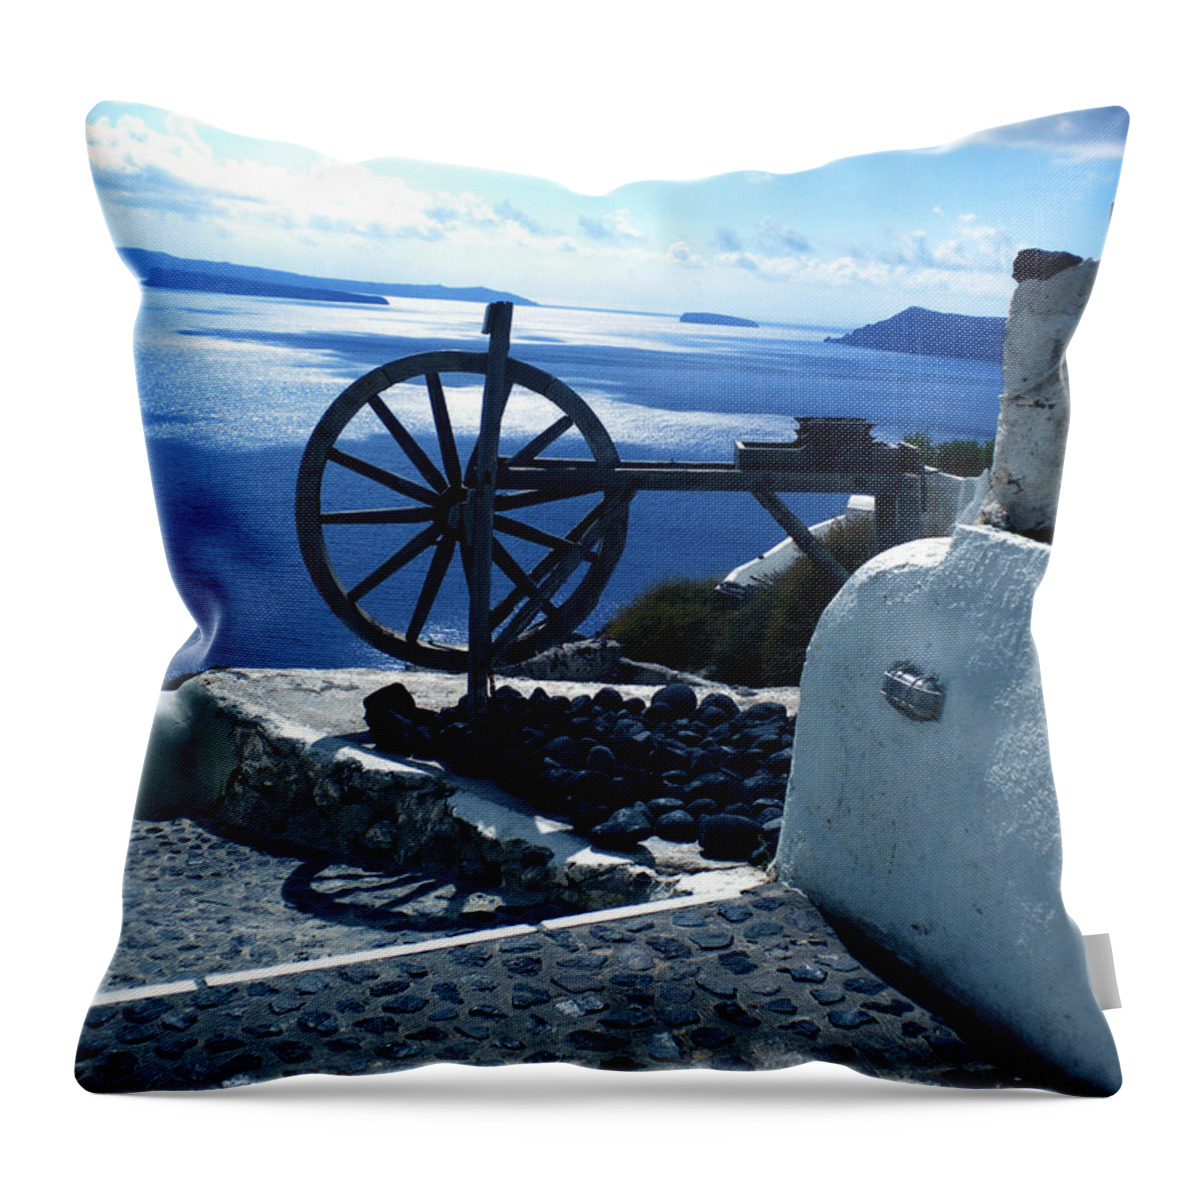 Colette Throw Pillow featuring the photograph View From Santorini Island Greece by Colette V Hera Guggenheim